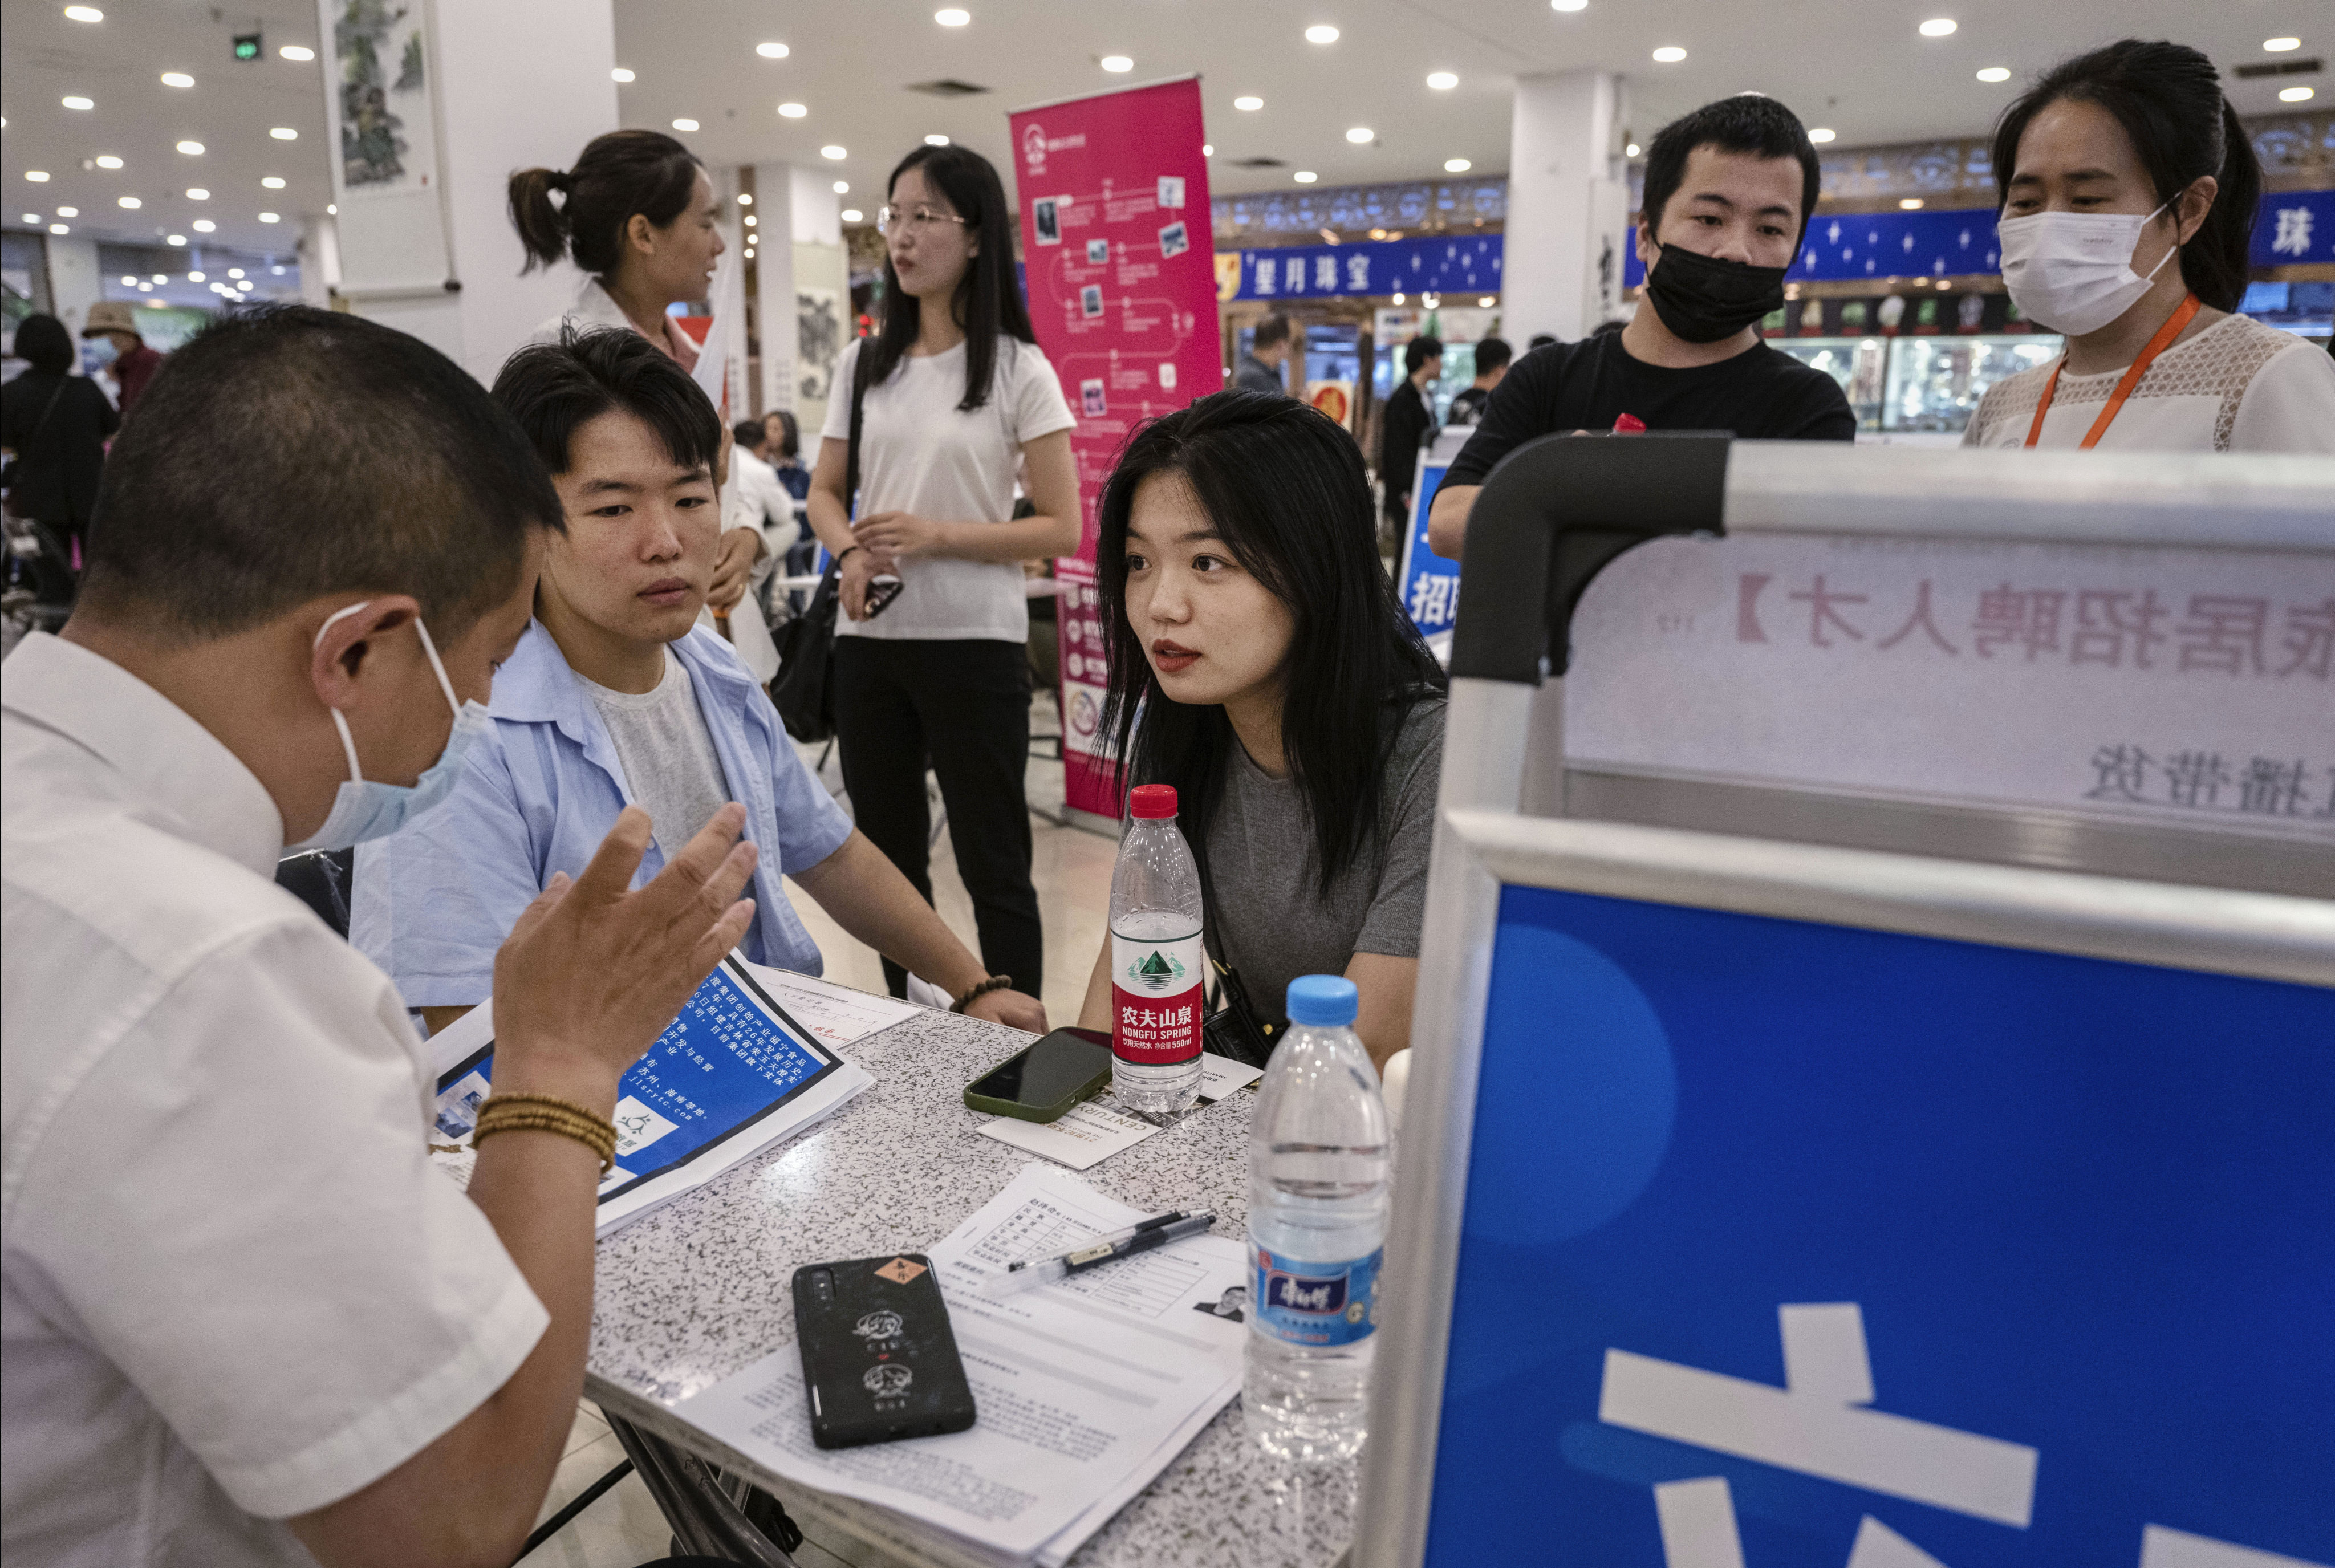 In May, the jobless rate for the 16-24 age group hit a new high of 20.8 per cent, up from the previous high of 20.4 per cent in April. Photo: Getty Images